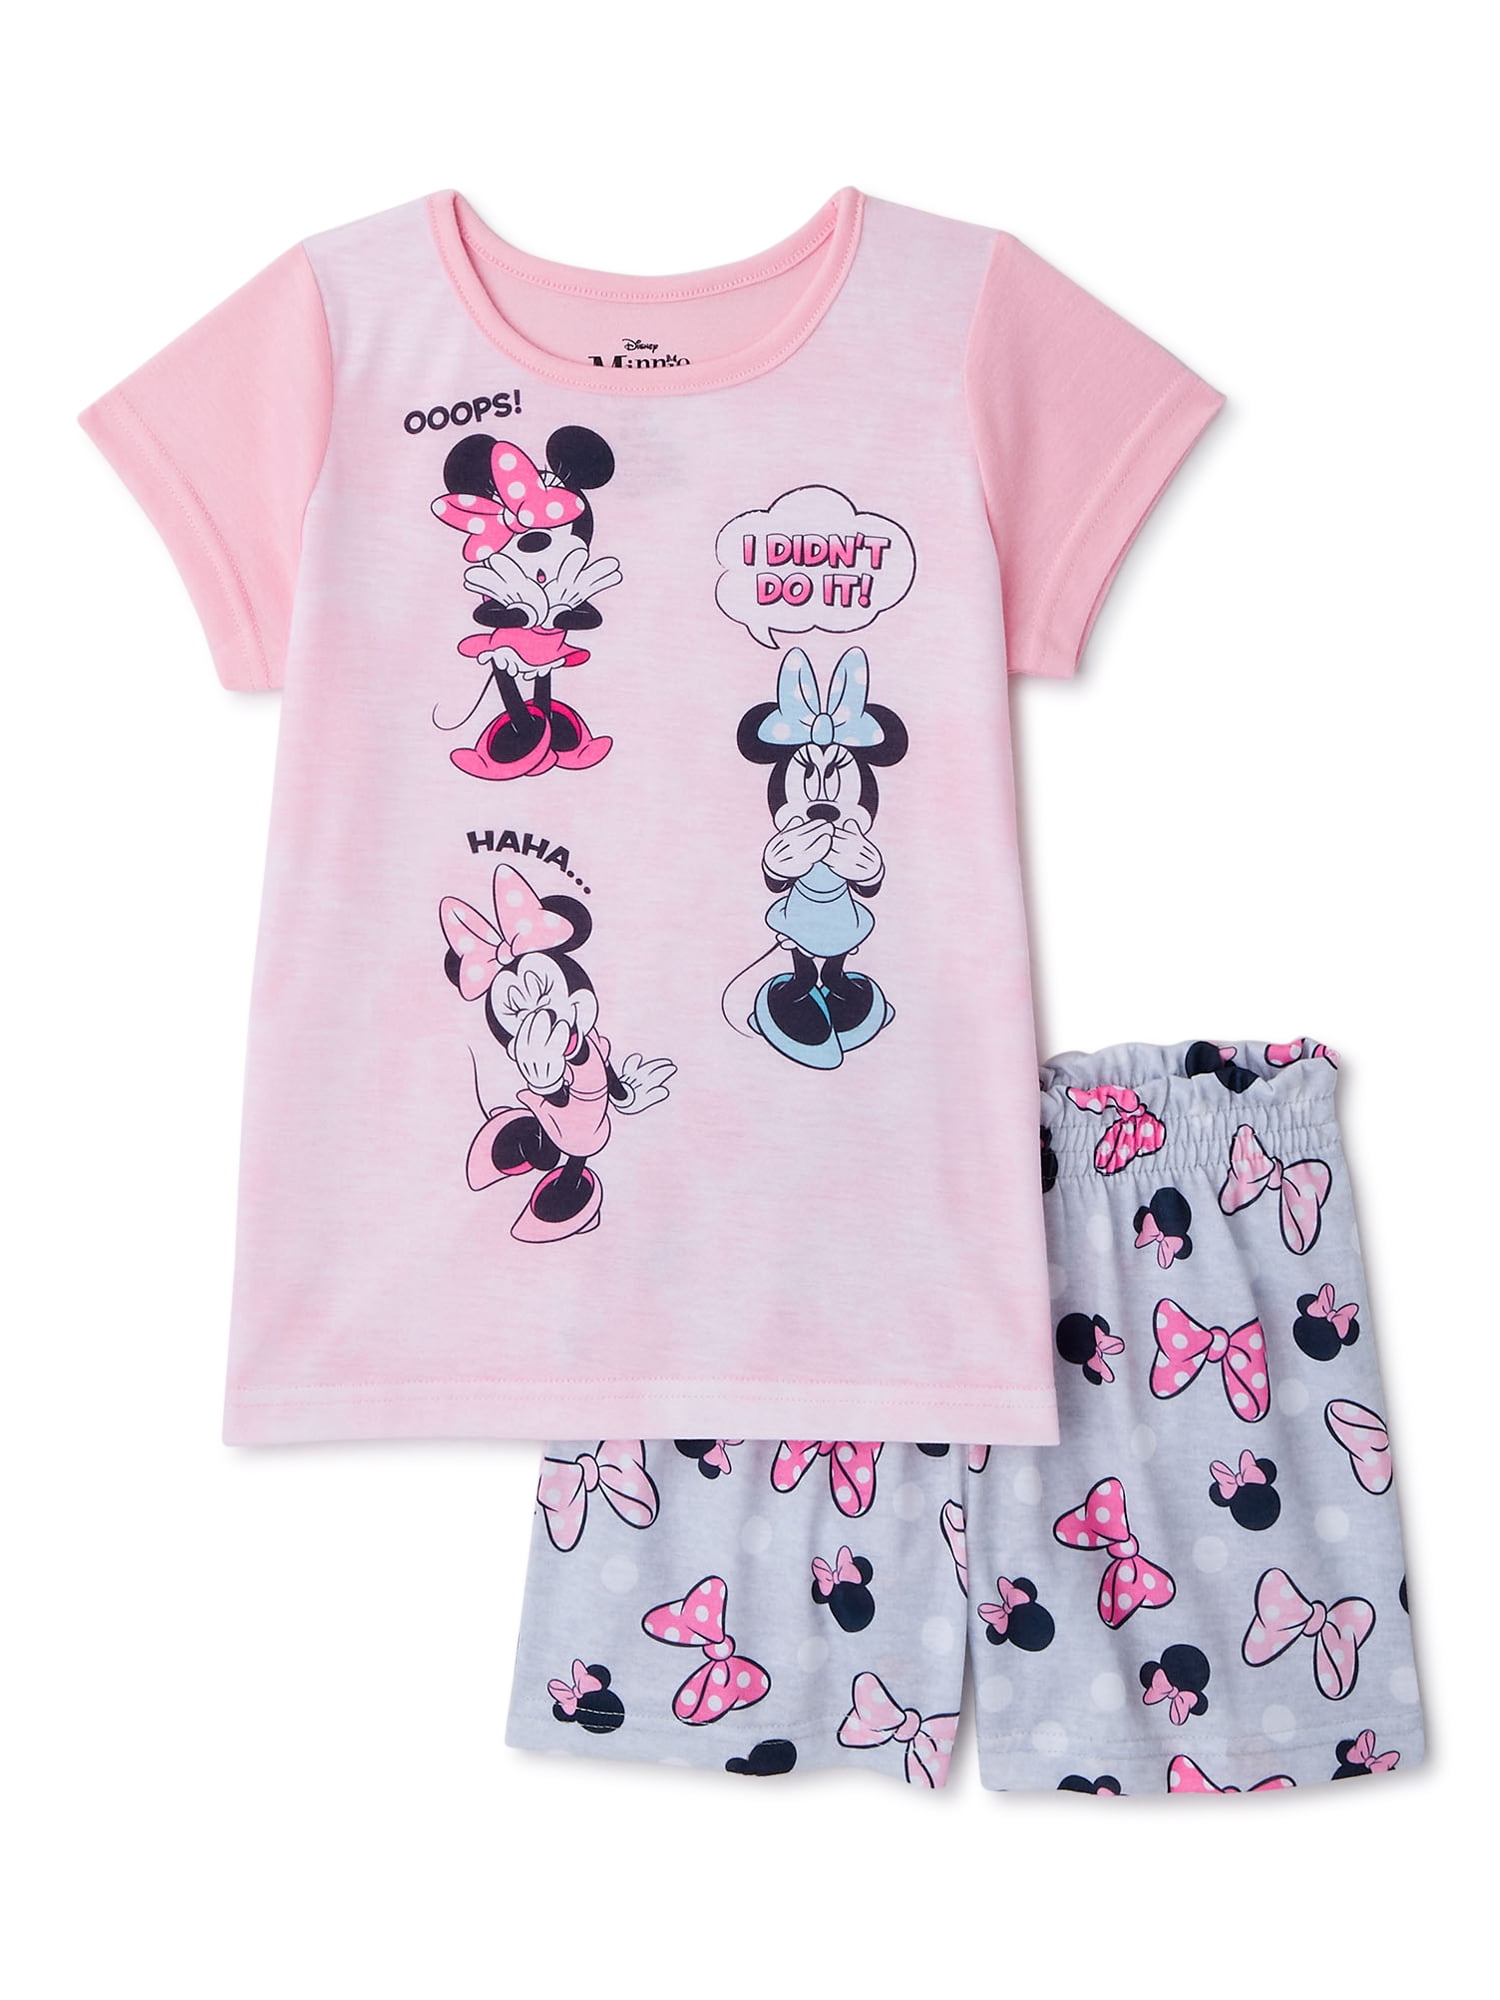 Disney Toddler Girls Pink Minnie Mouse Red Pajamas Pj's 18M NWT *FAST SHIPPING 